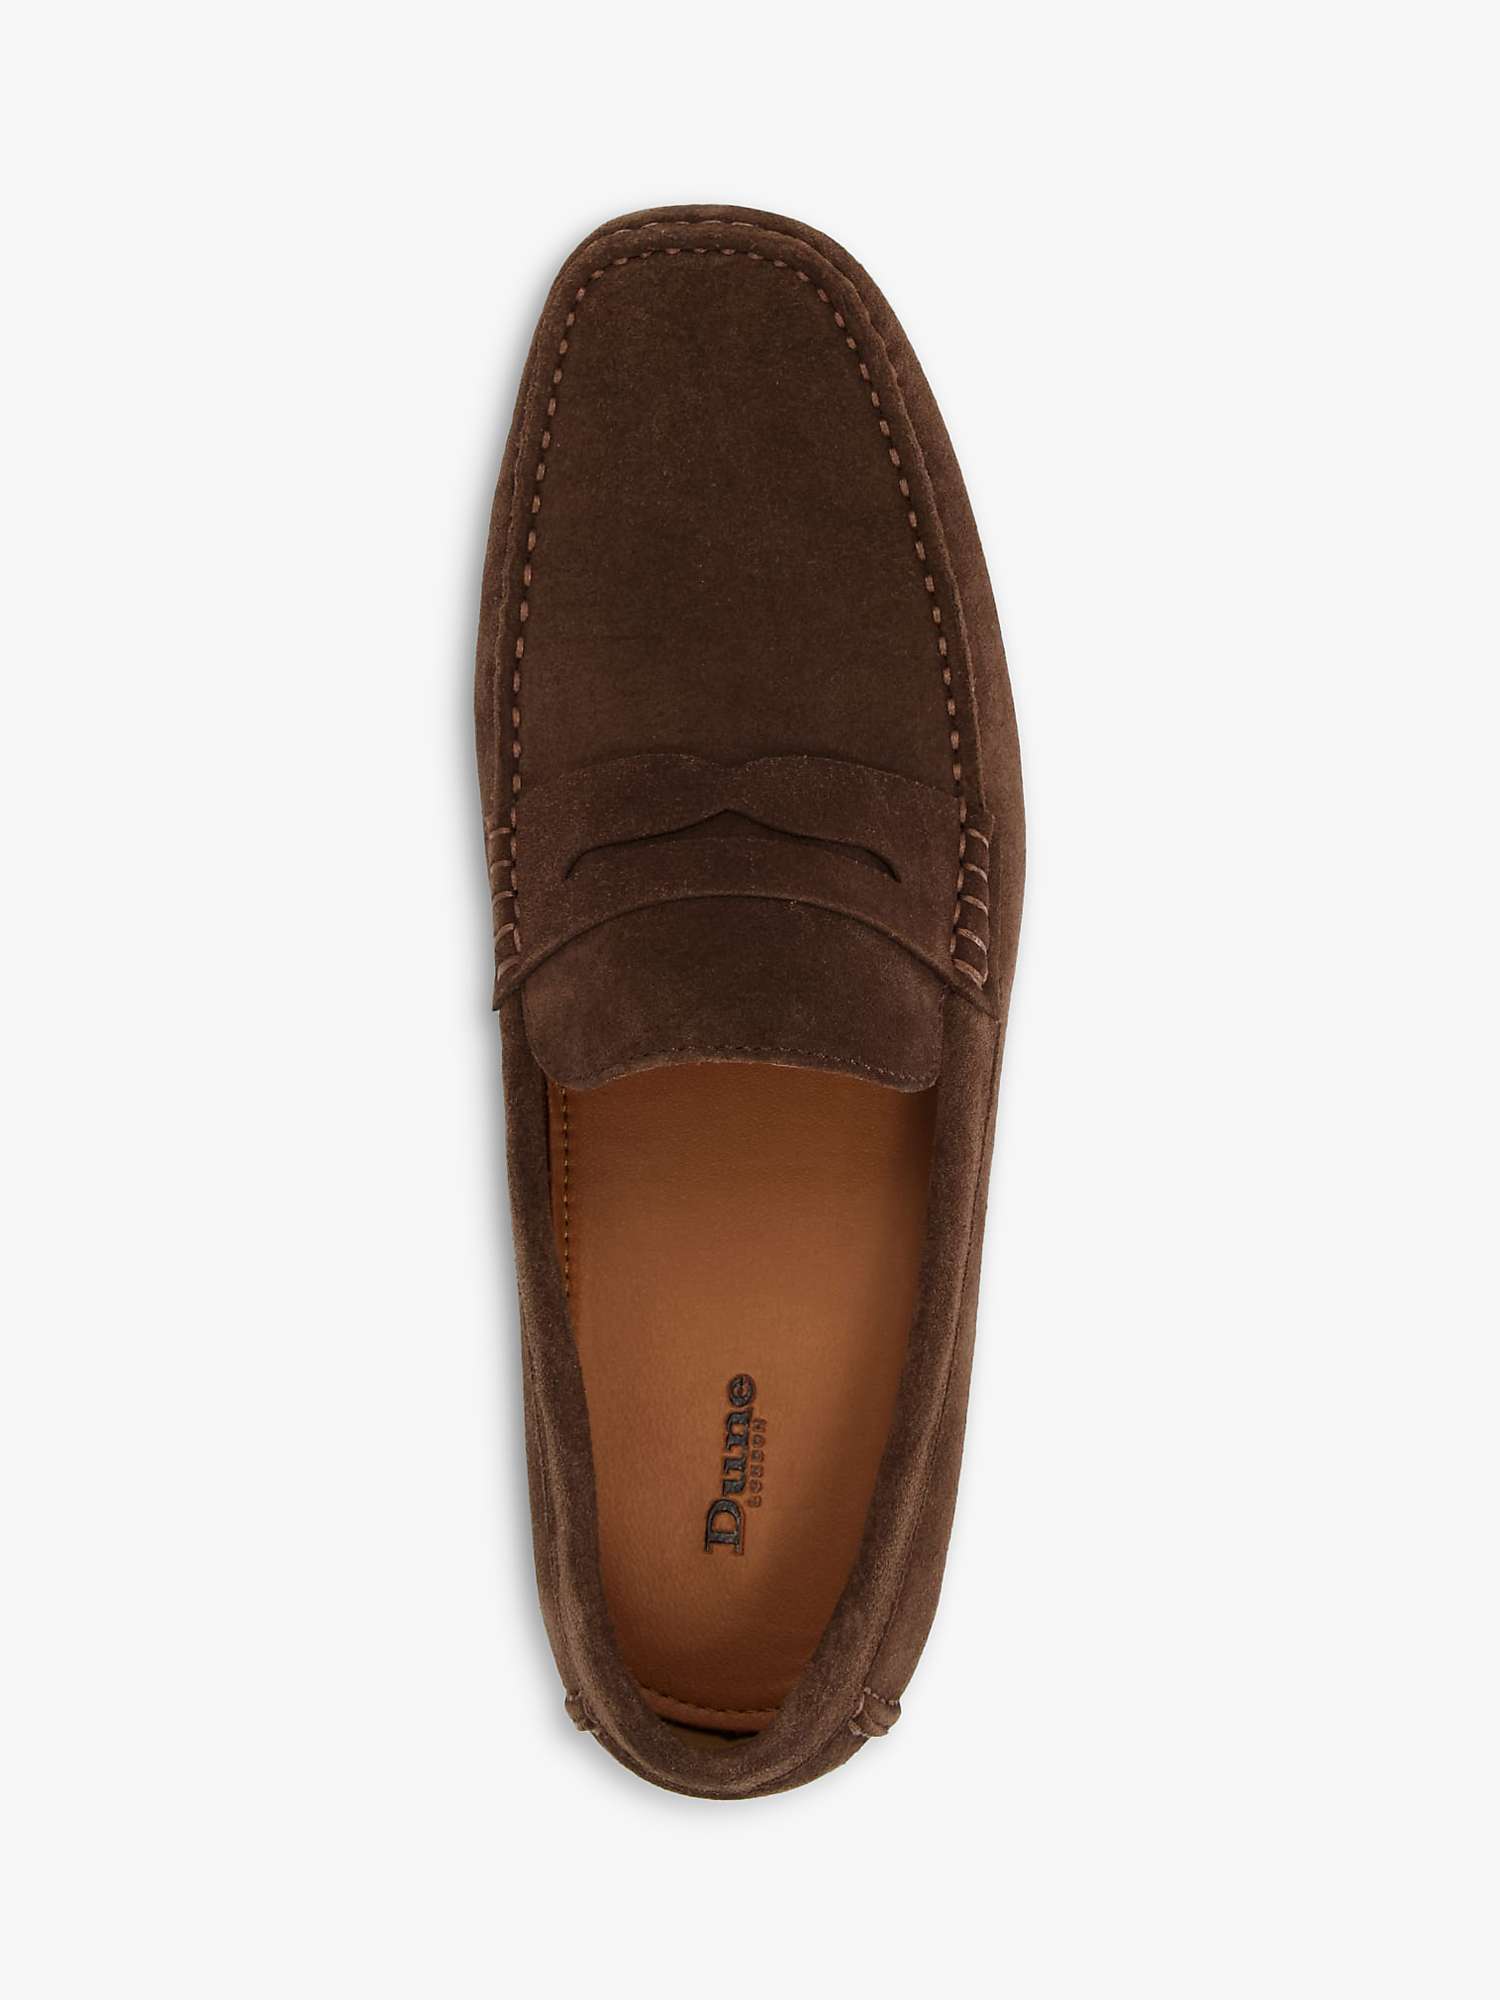 Buy Dune Bradlay Suede Square Toe Moccasin Loafers Online at johnlewis.com